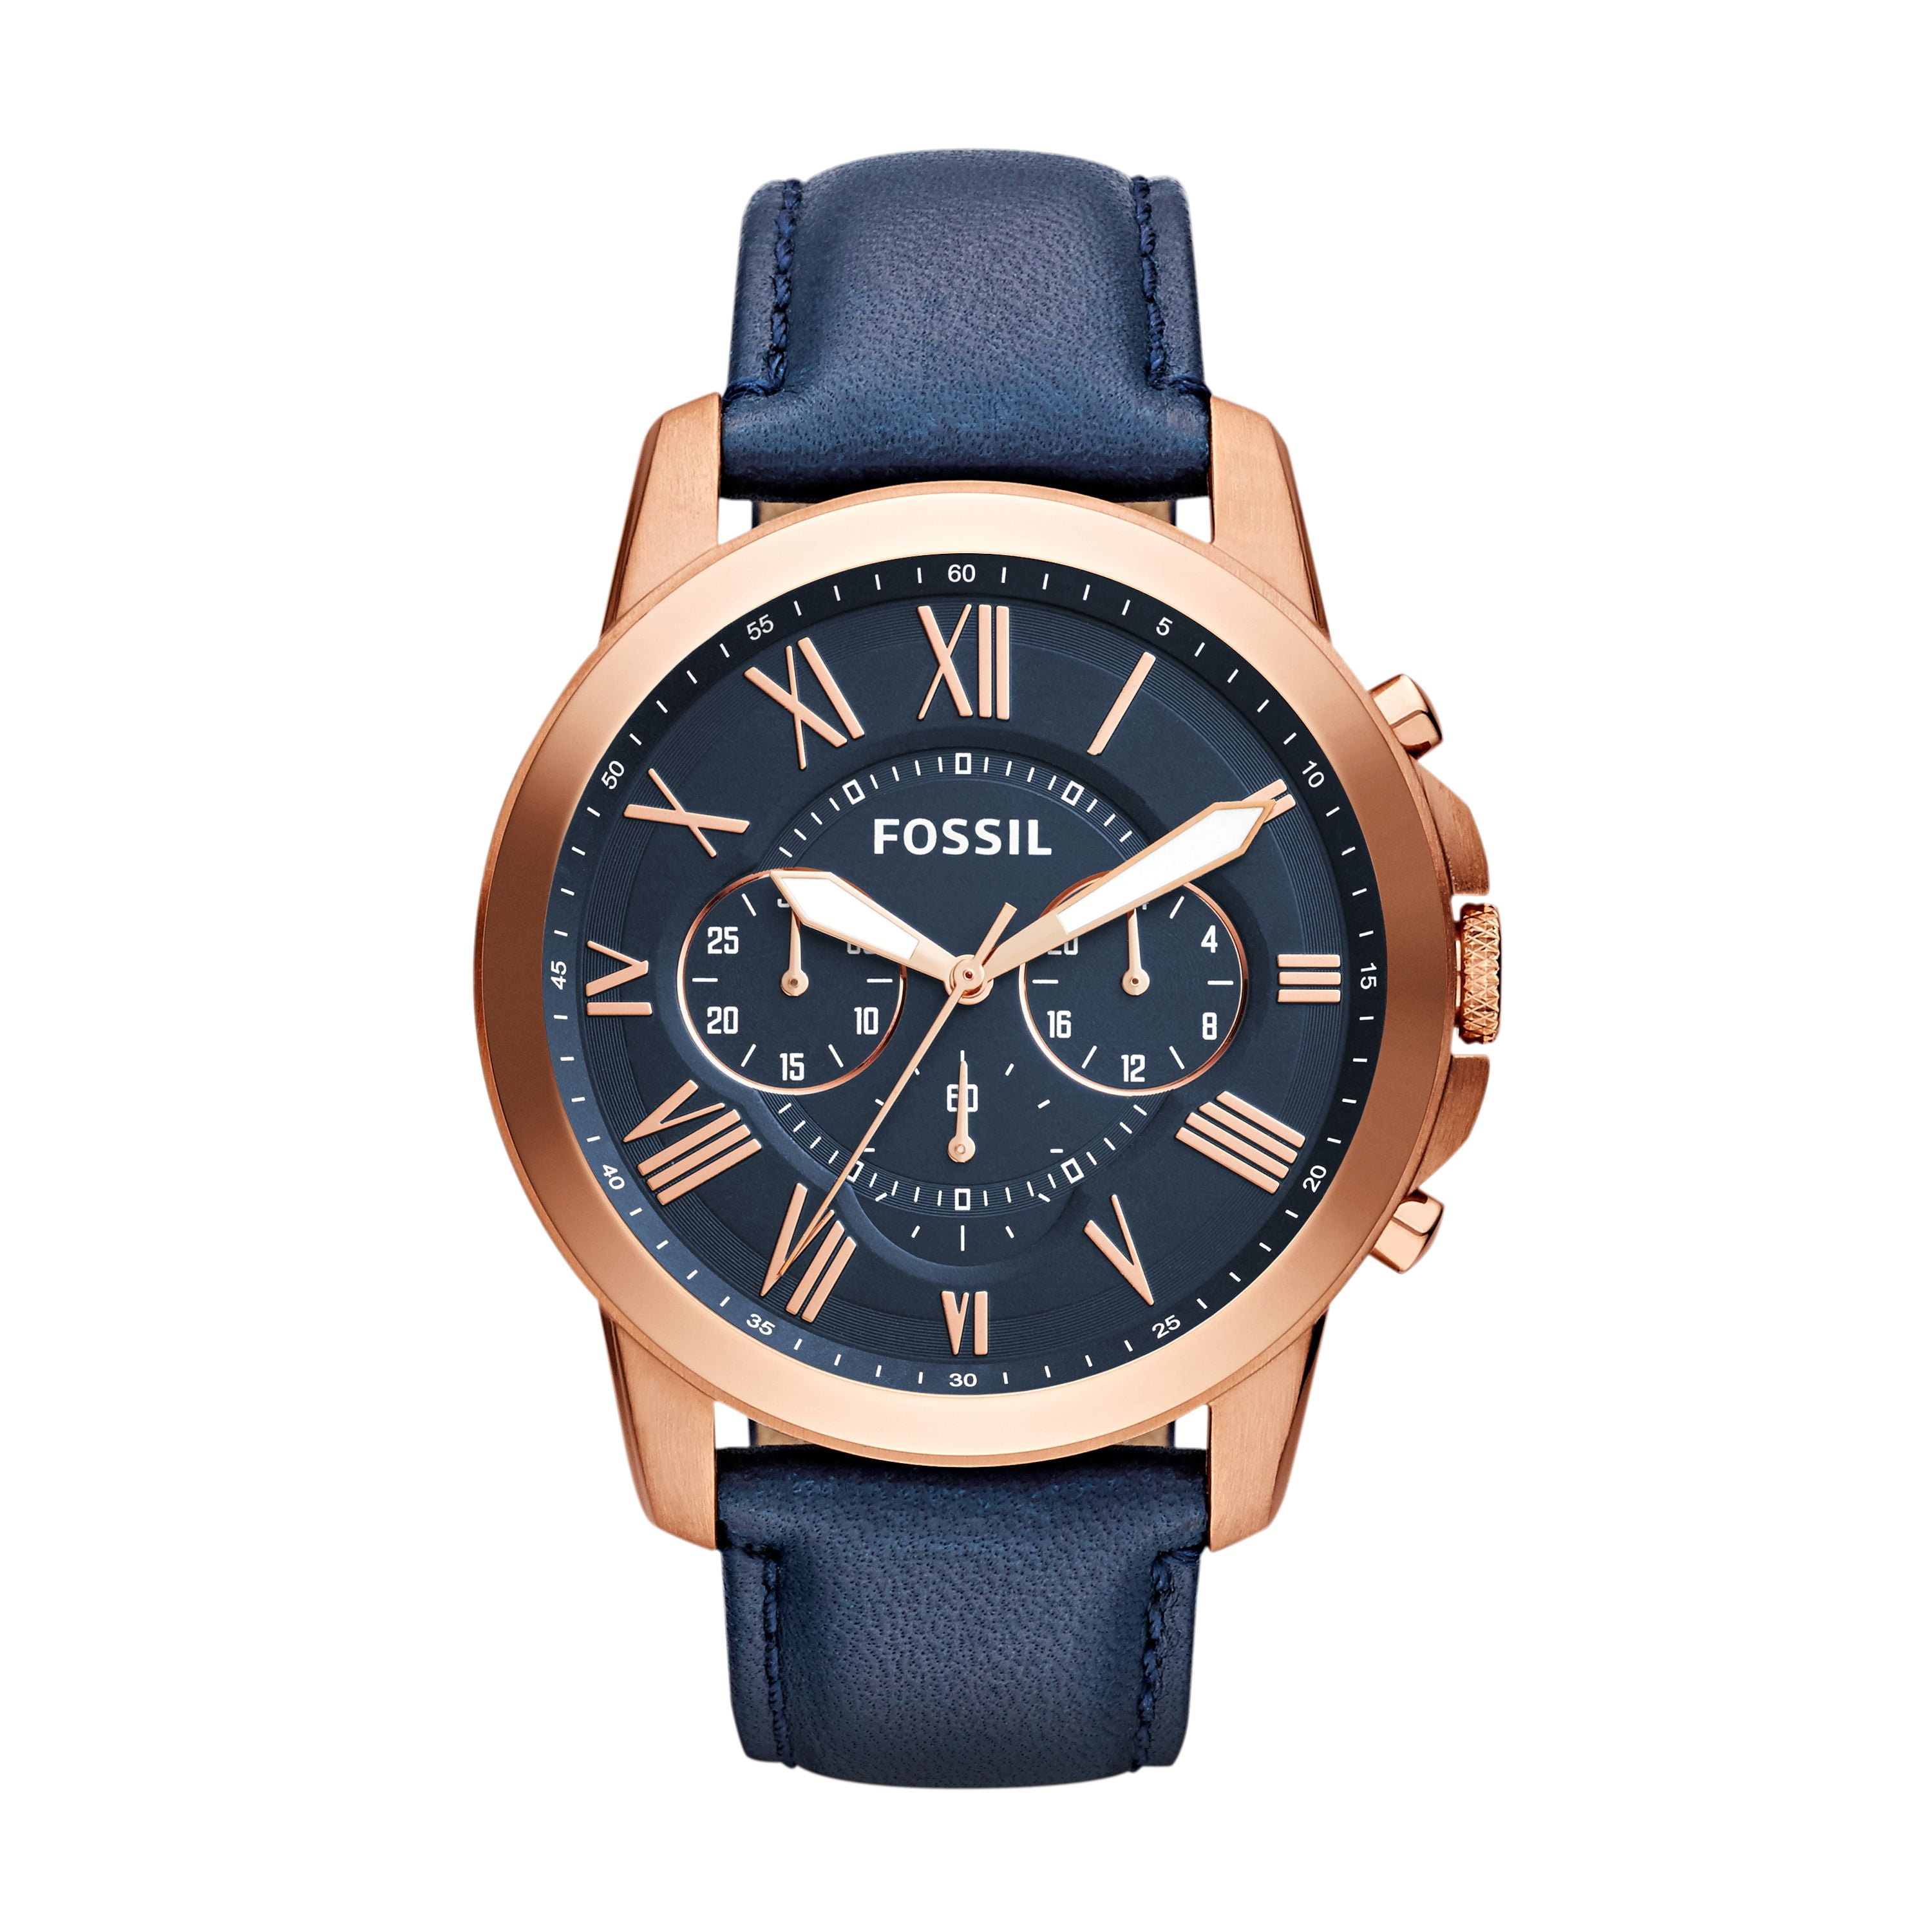 Fossil Men's Grant Chronograph Blue Leather Watch (Style